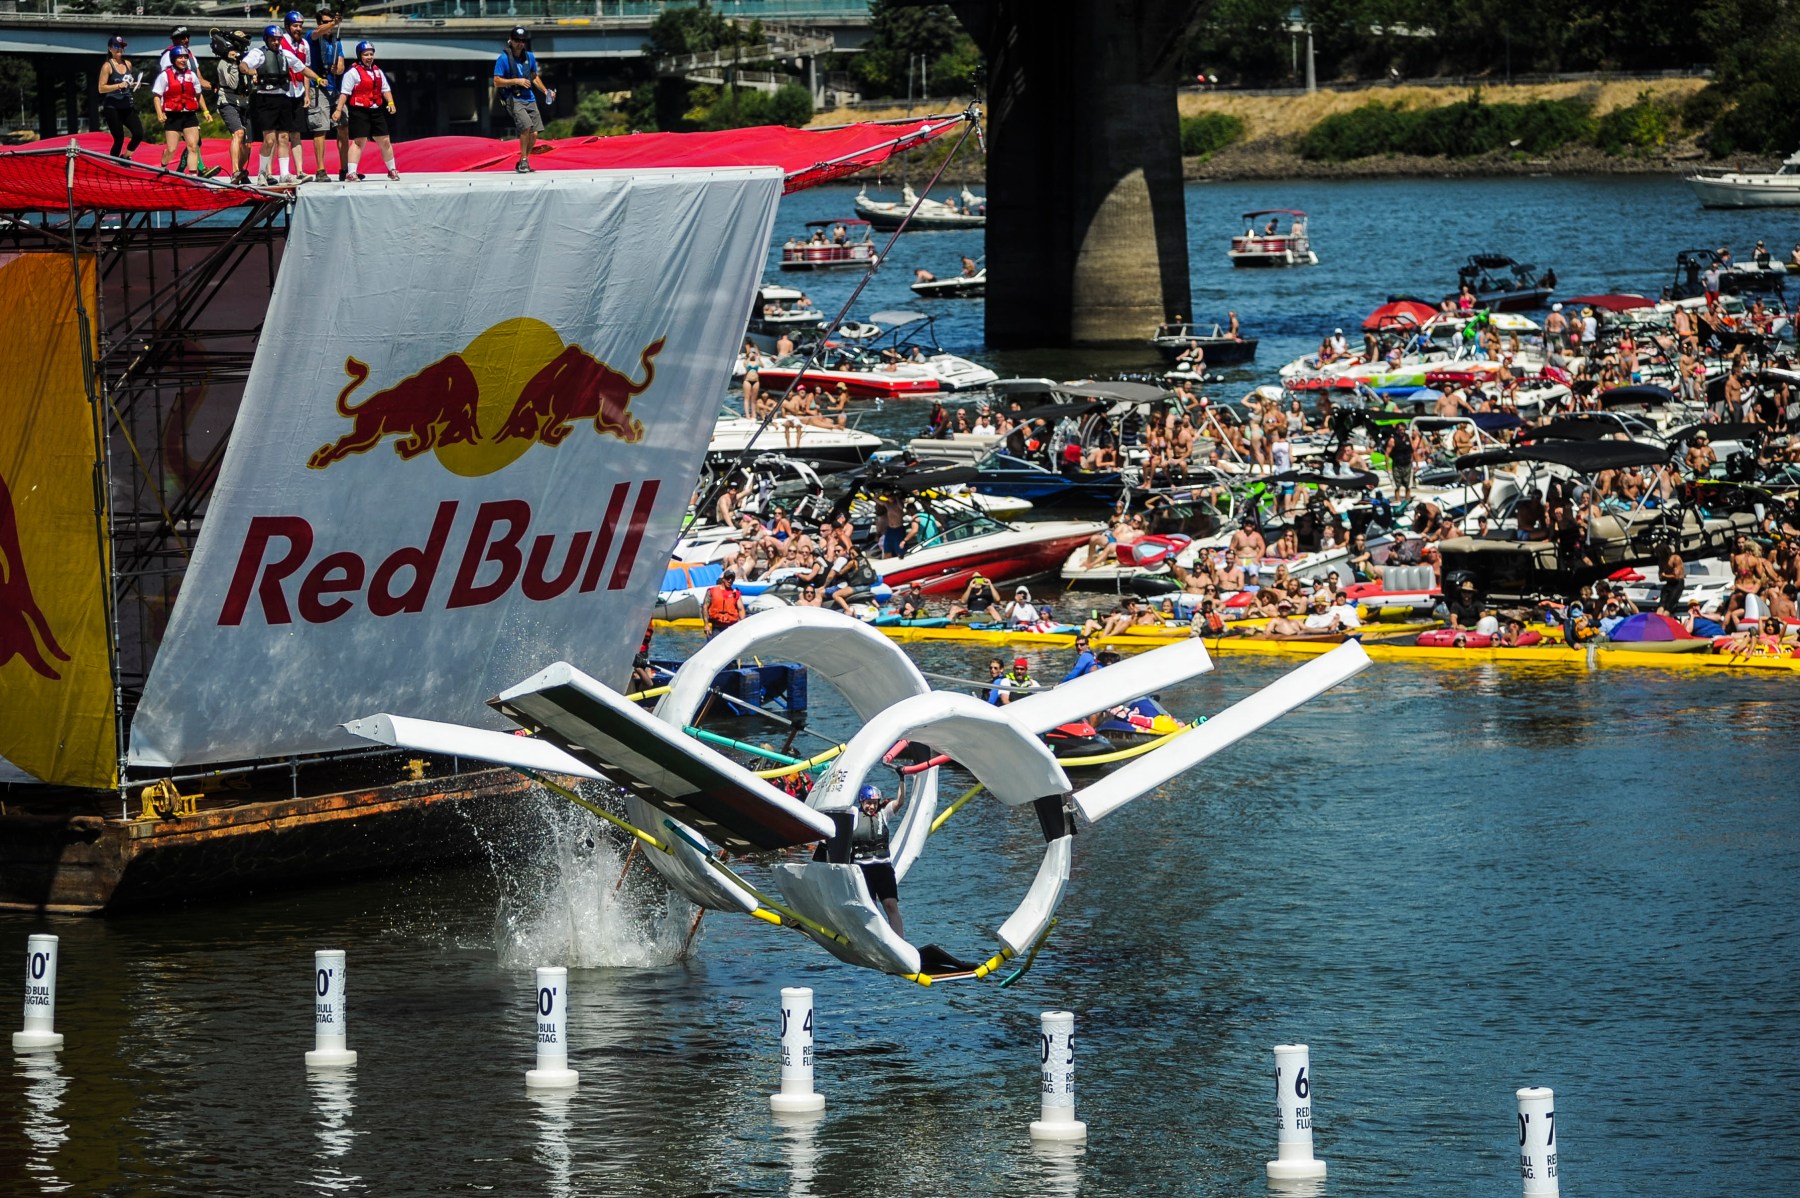 Team Rings of Fire showcased their intricate aircraft as it glided across the Tom McCall Waterfront Park at the 2015 Red Bull Flugtag Race in Portland, Oregon.